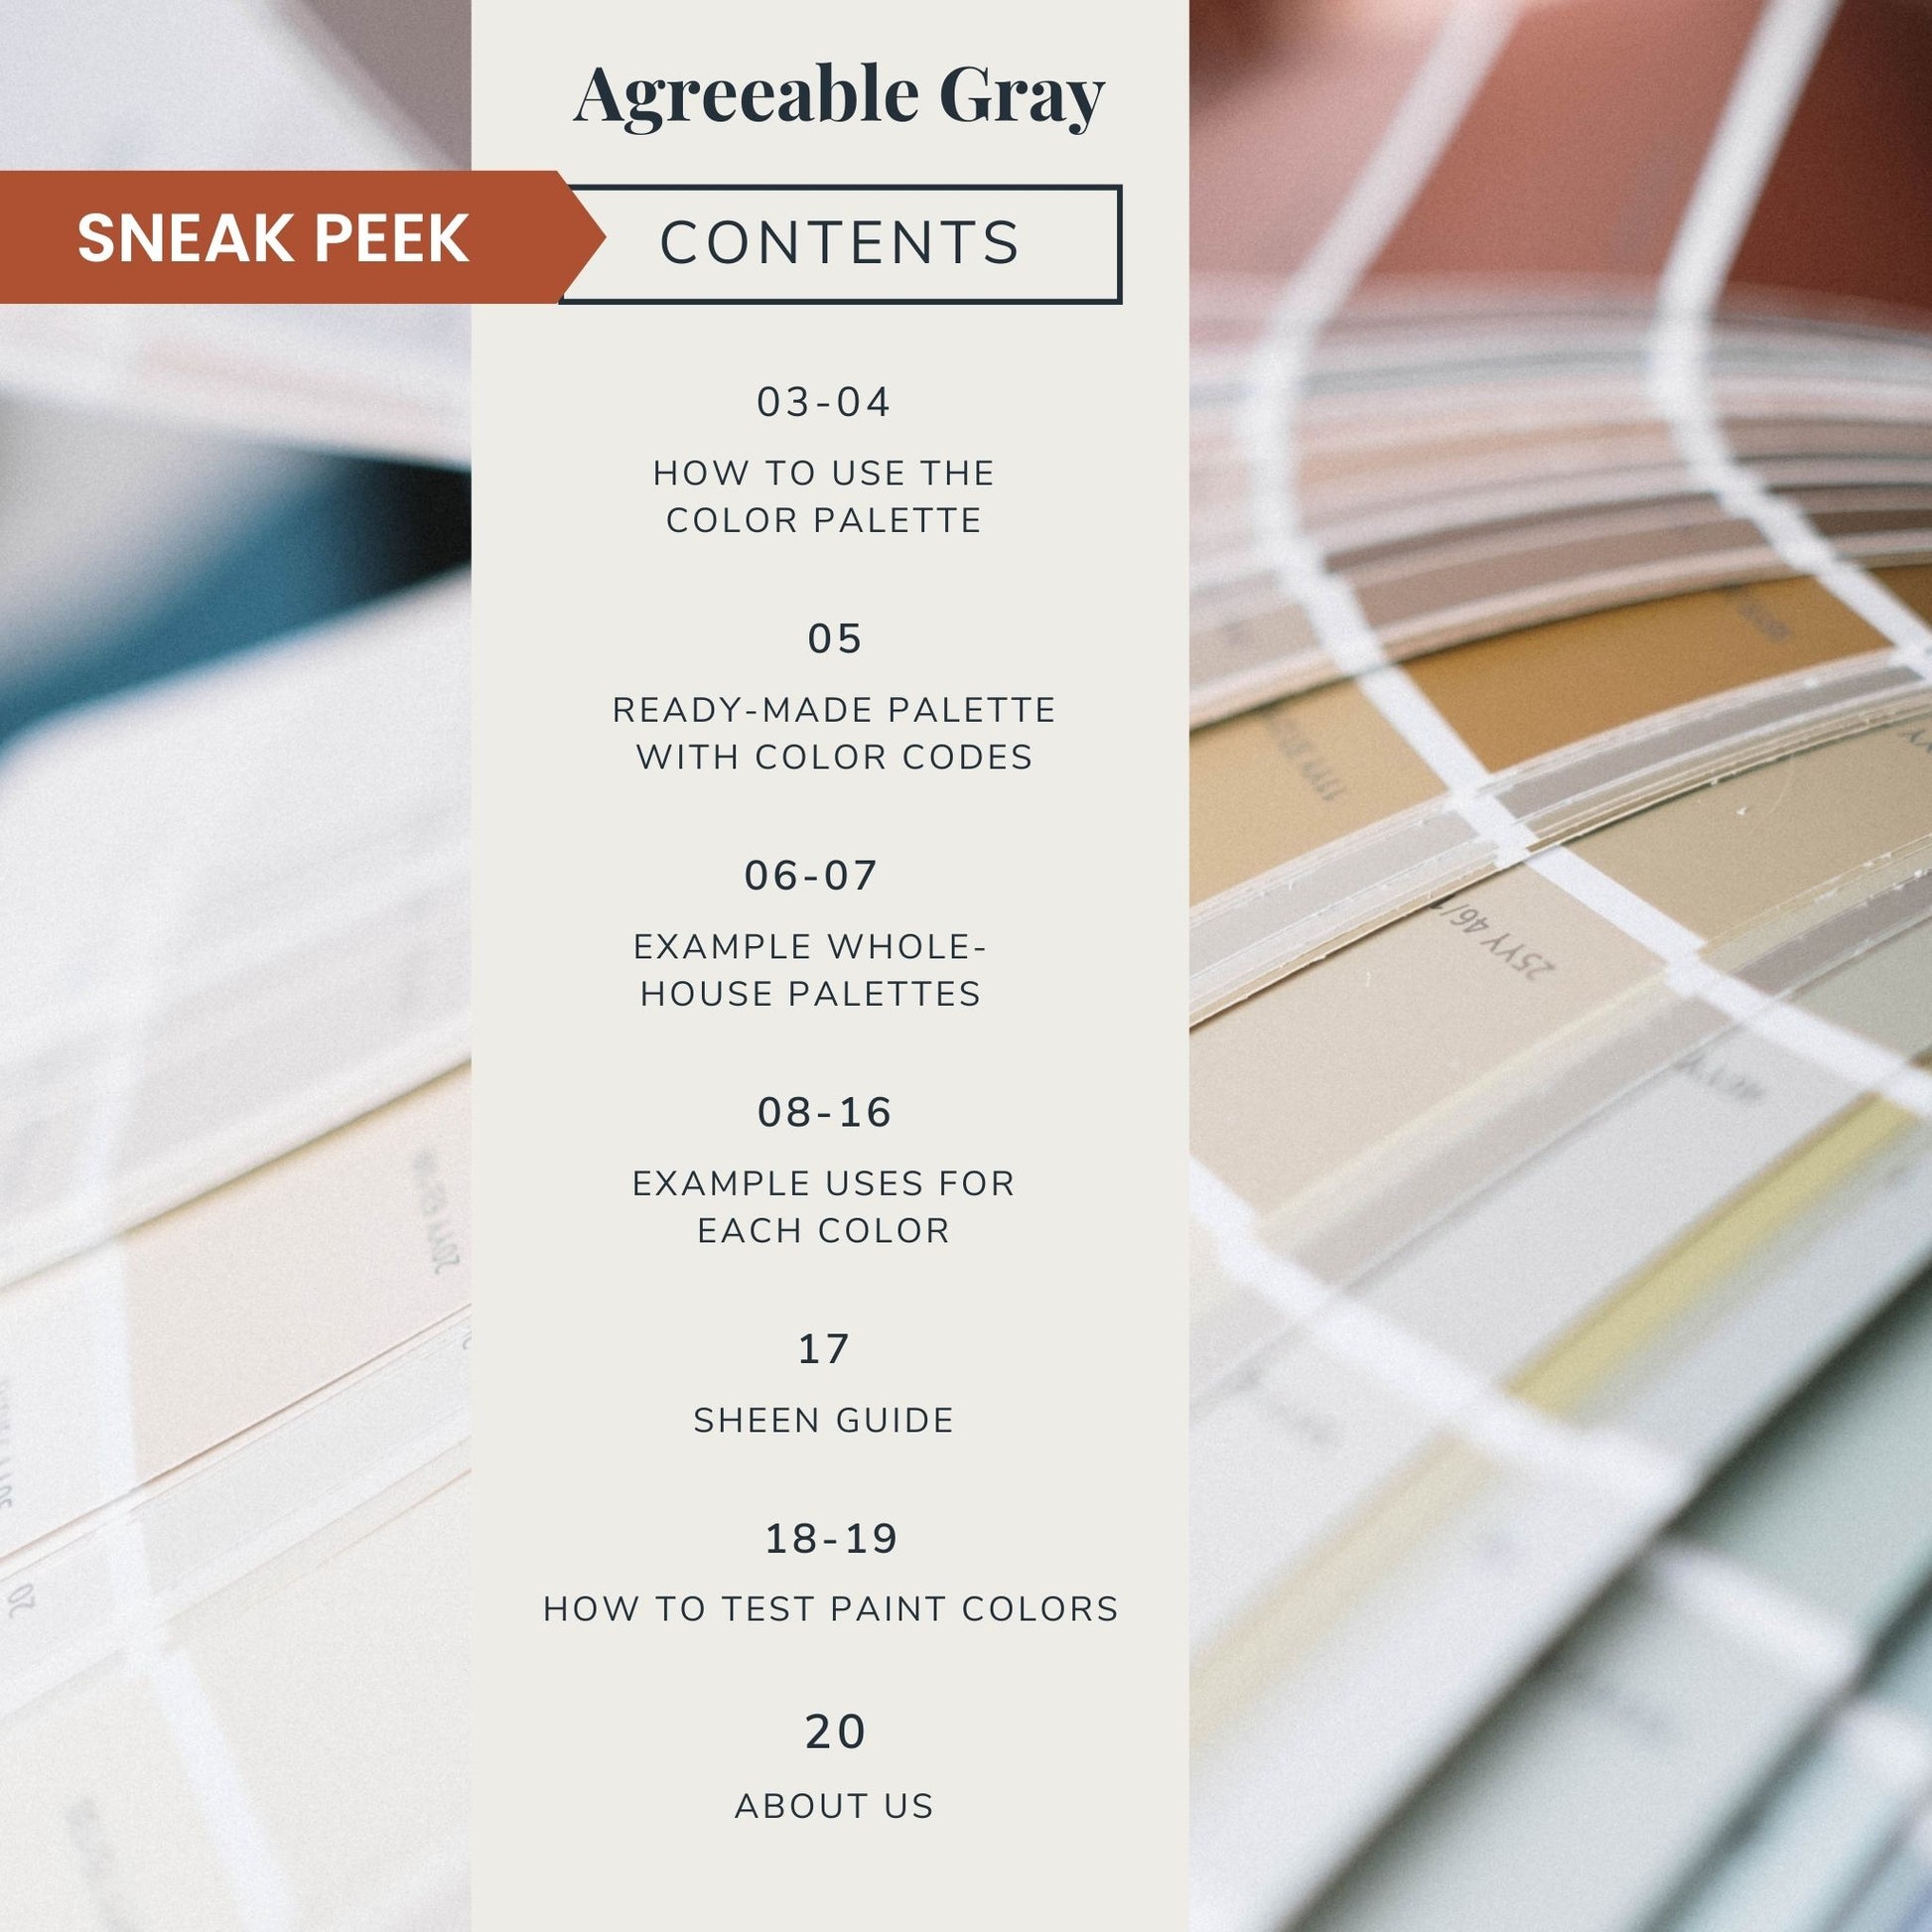 Contents list for Sherwin-Williams Agreeable Gray color palette guide